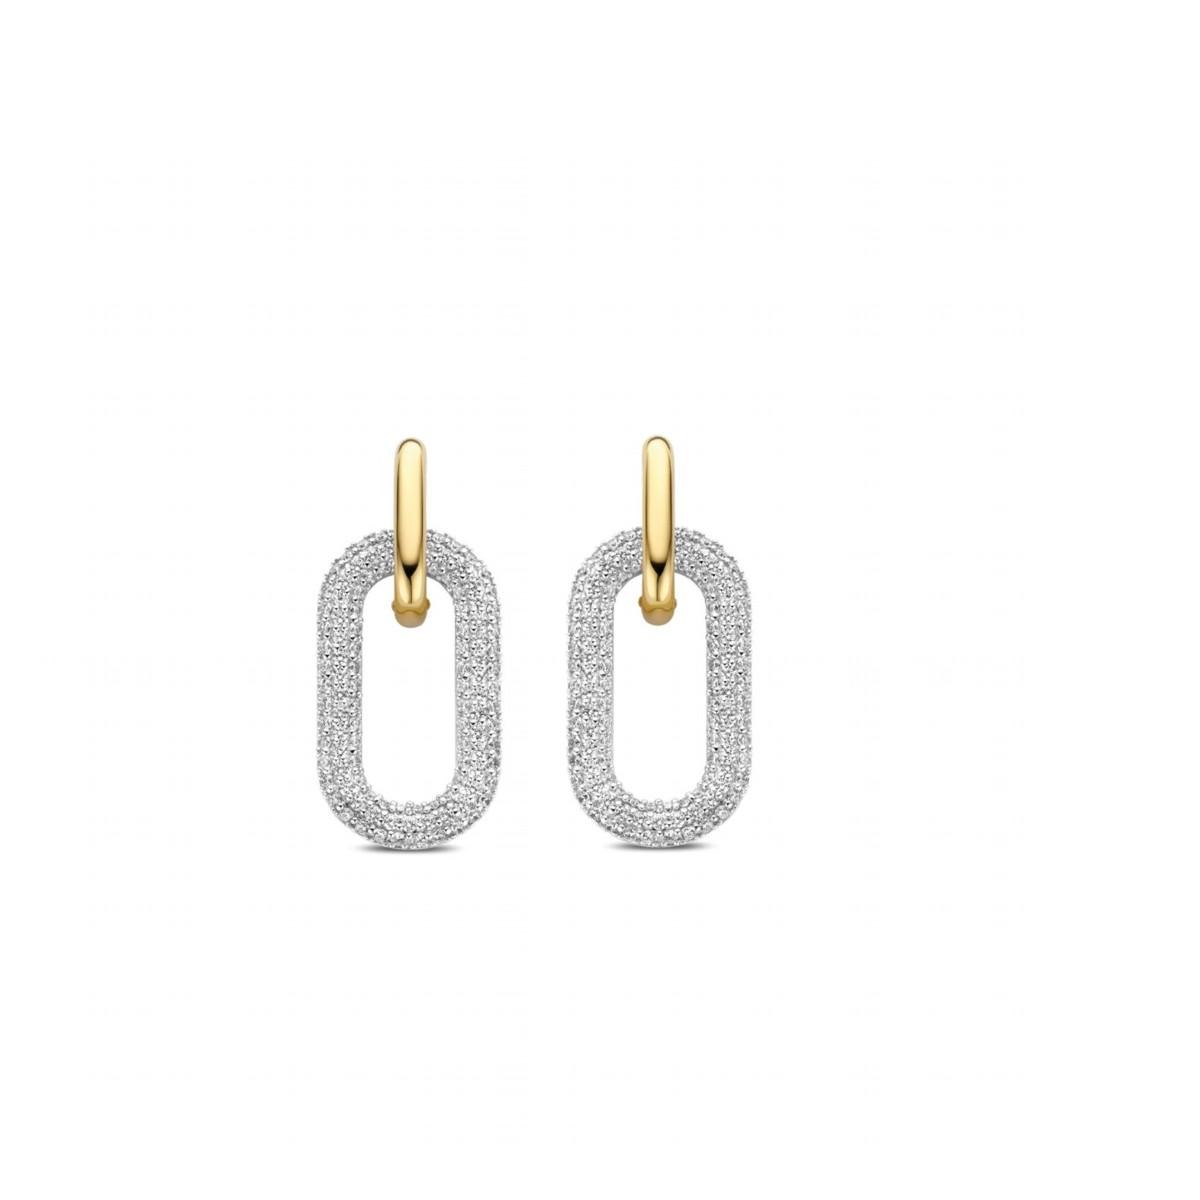 TI SENTO GOLD-PLATED SILVER EARRINGS 7844ZY